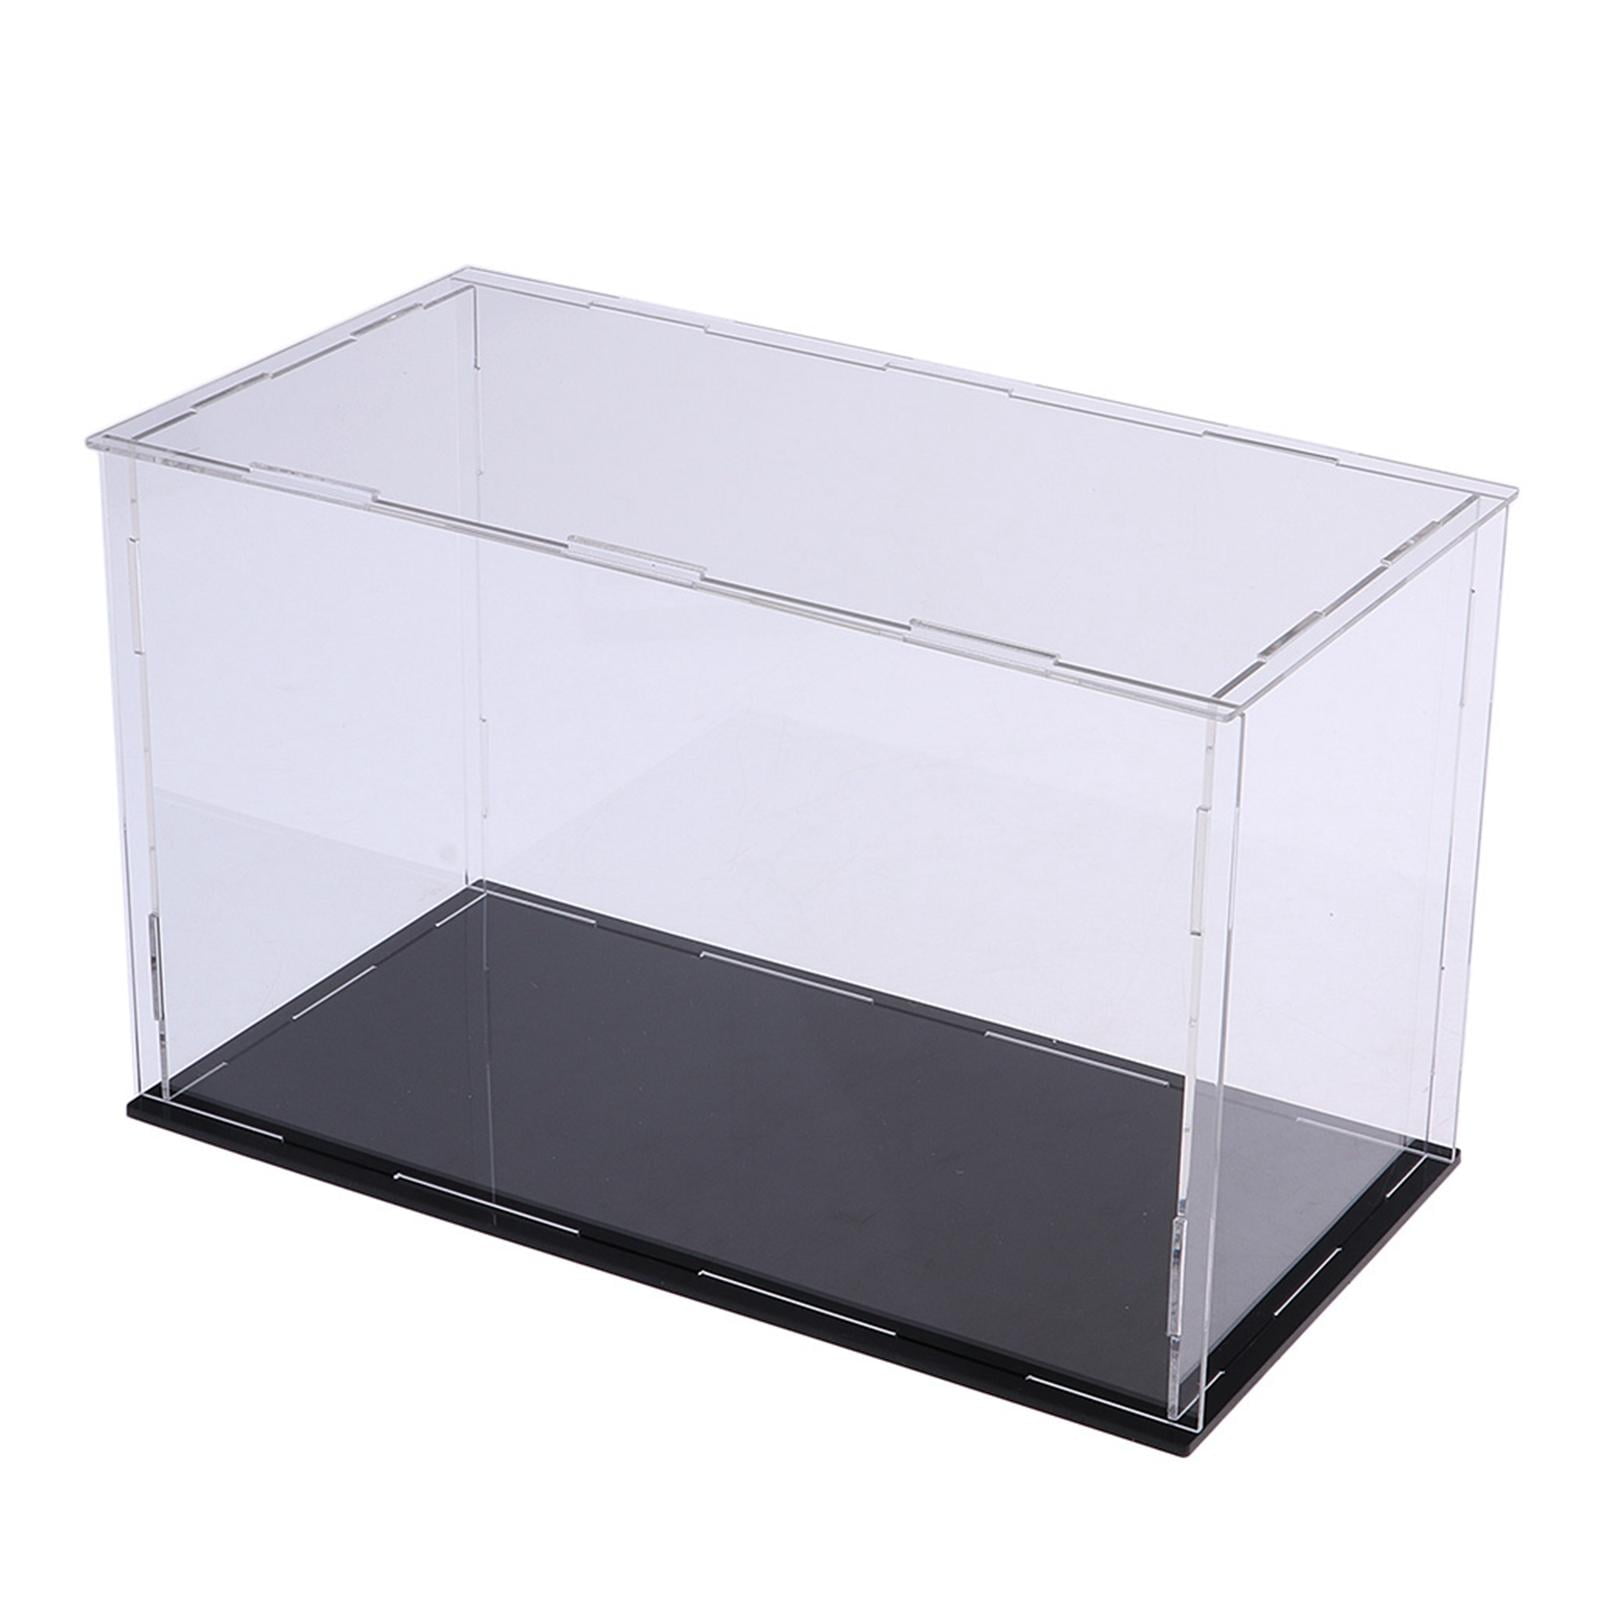 Doll Display Box Cabinet Showcase Plastic Model Figure Toy Holder Case Container 